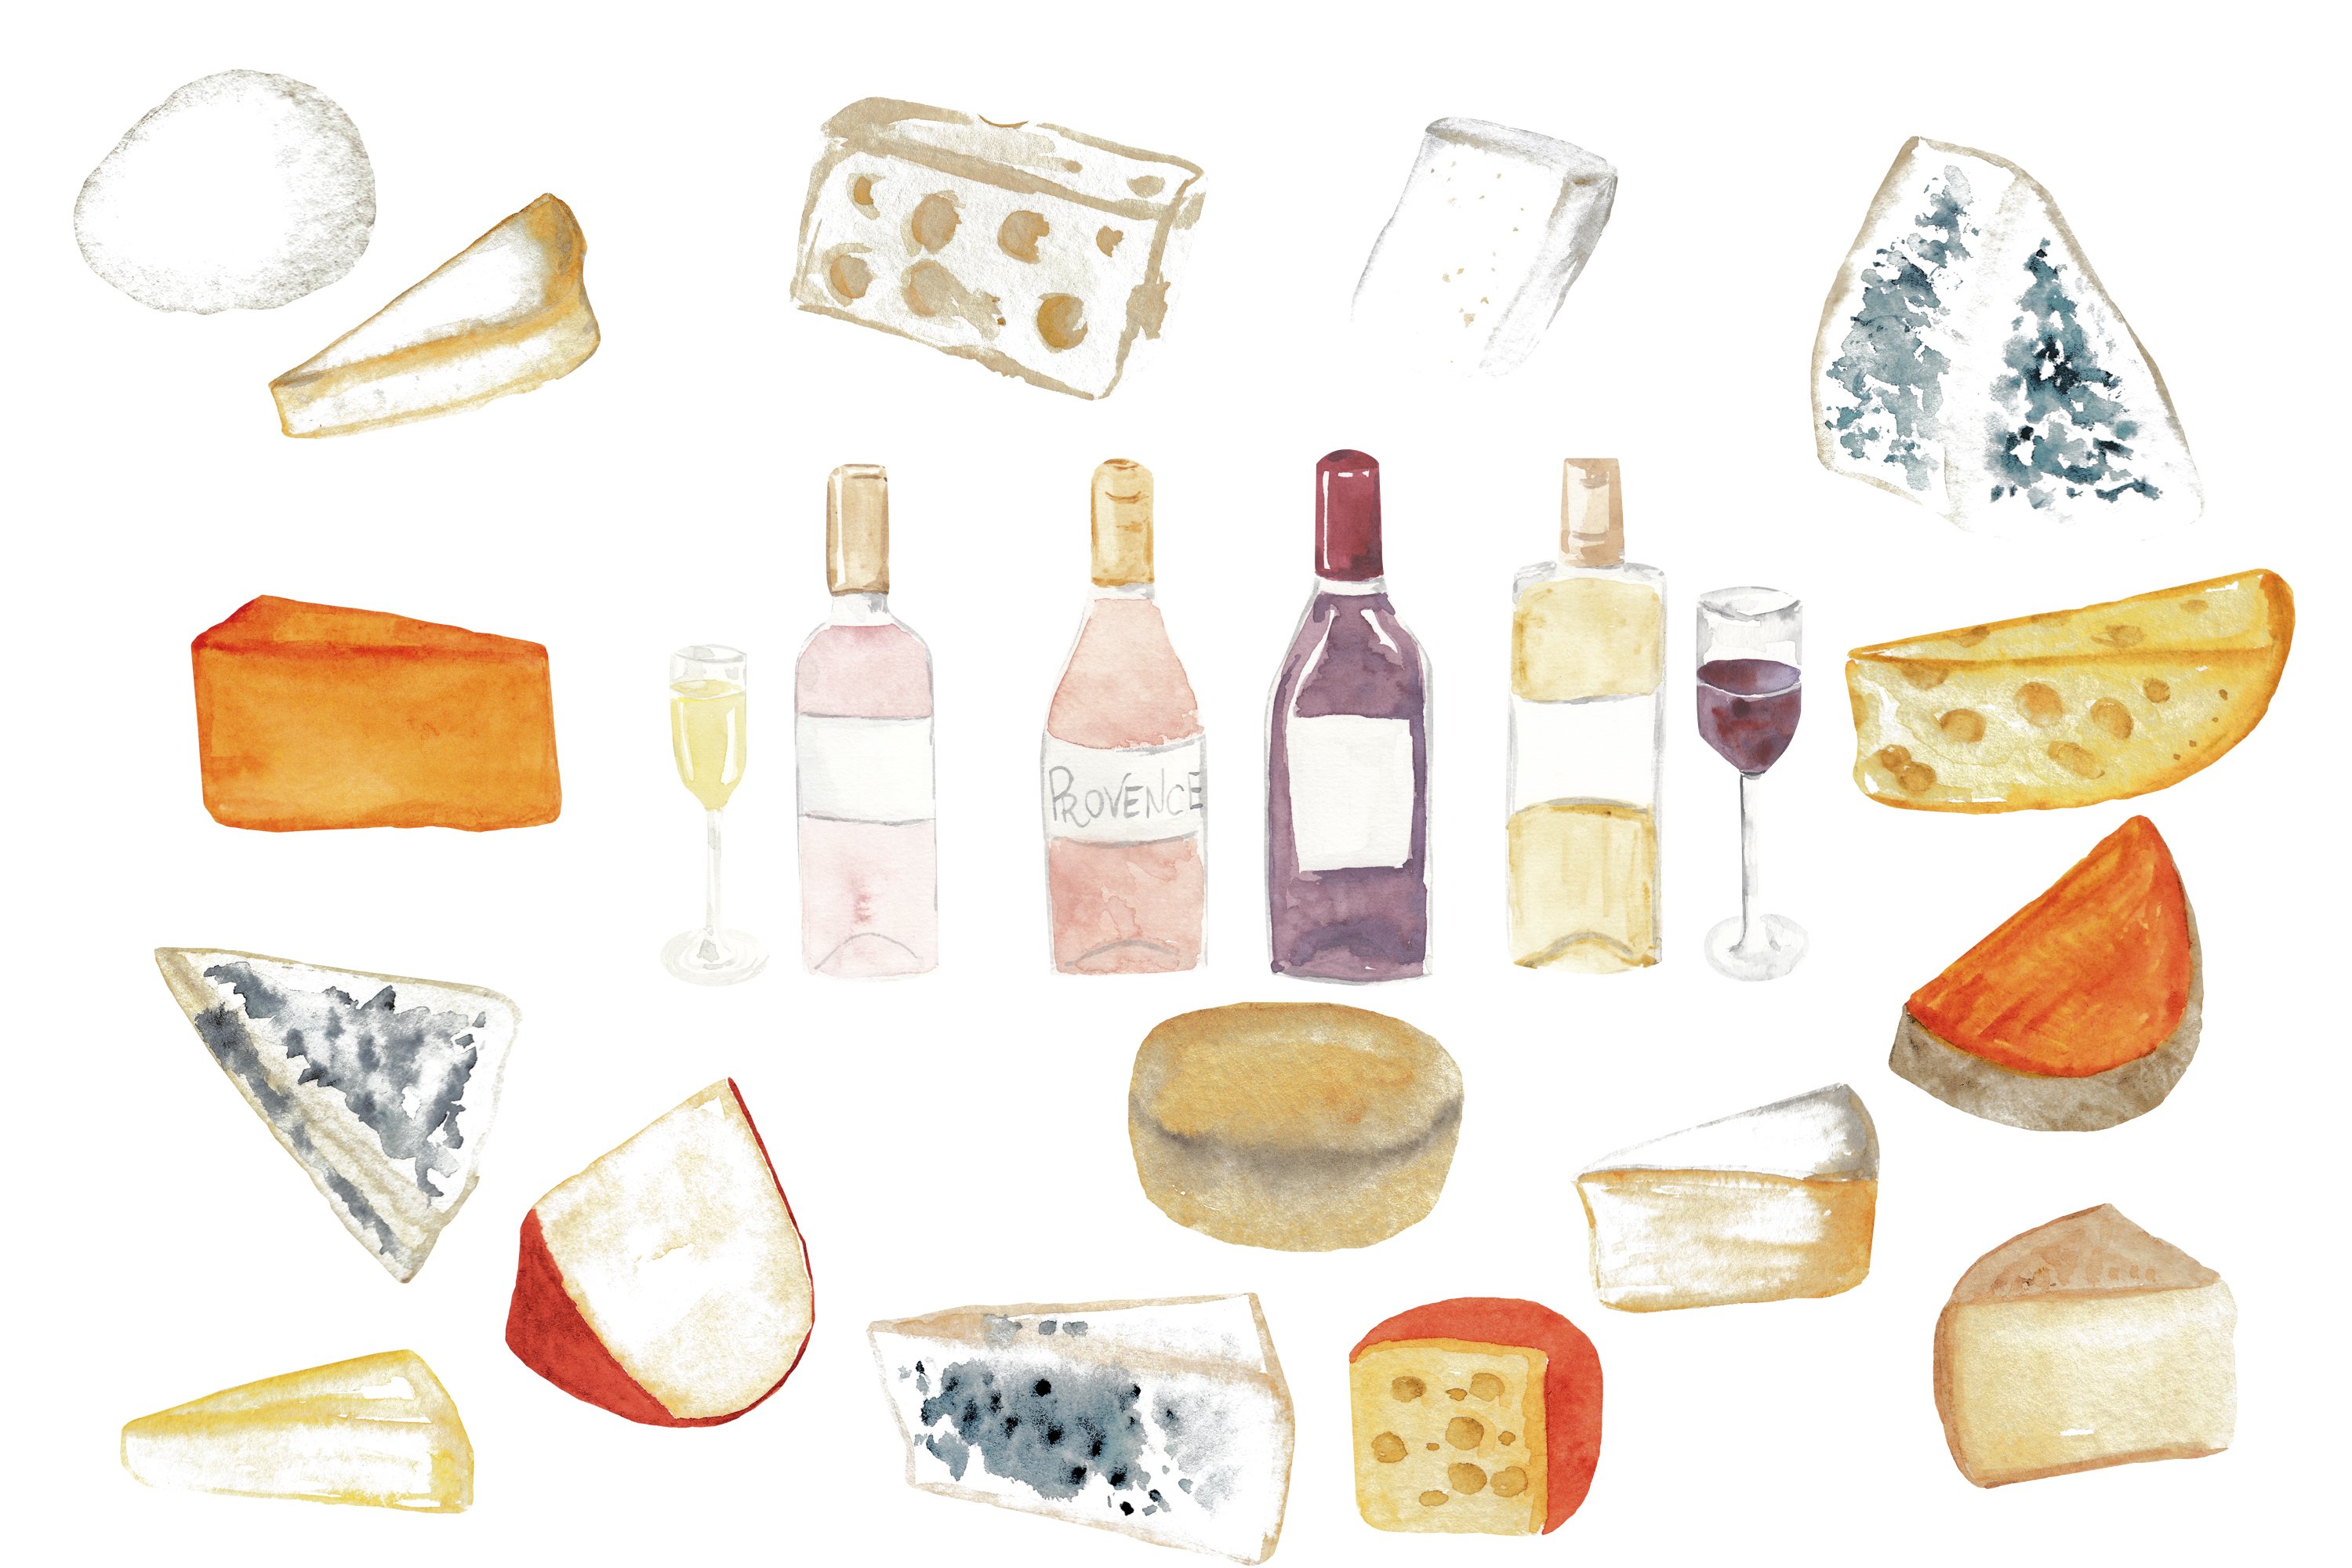 A set of gorgeous images of French cheese and vintage wine.